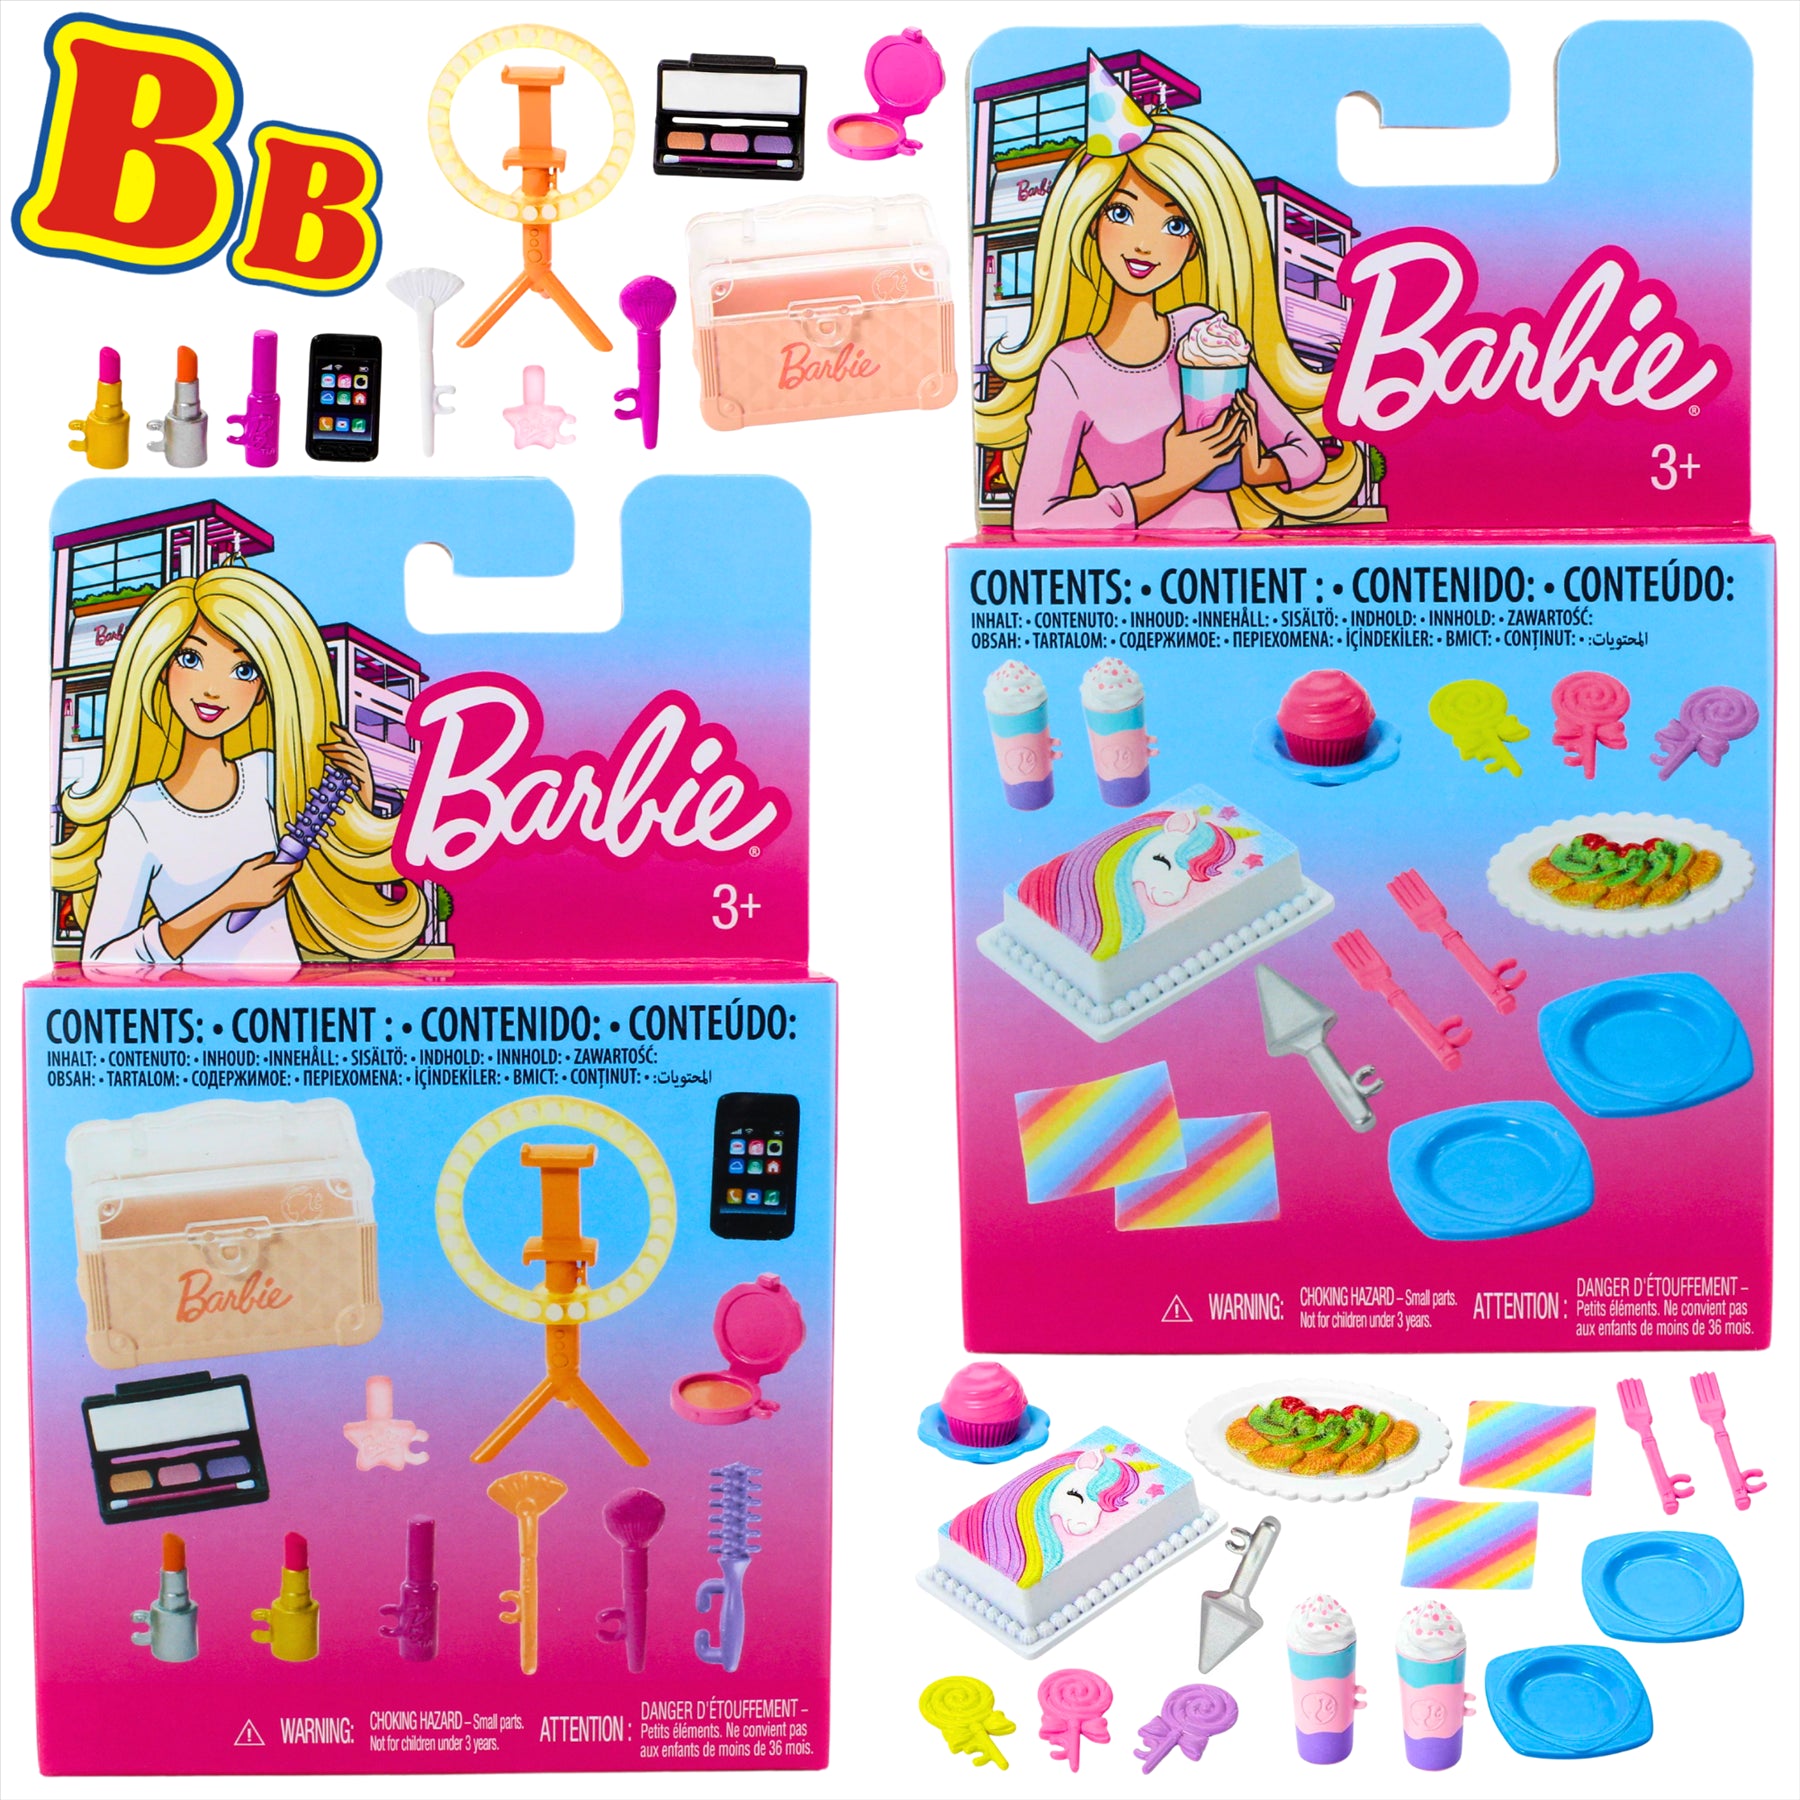 Barbie 27 Piece Doll and House Accessory Set with Cake, Plates, Make-Up, and Phone - Twin Pack